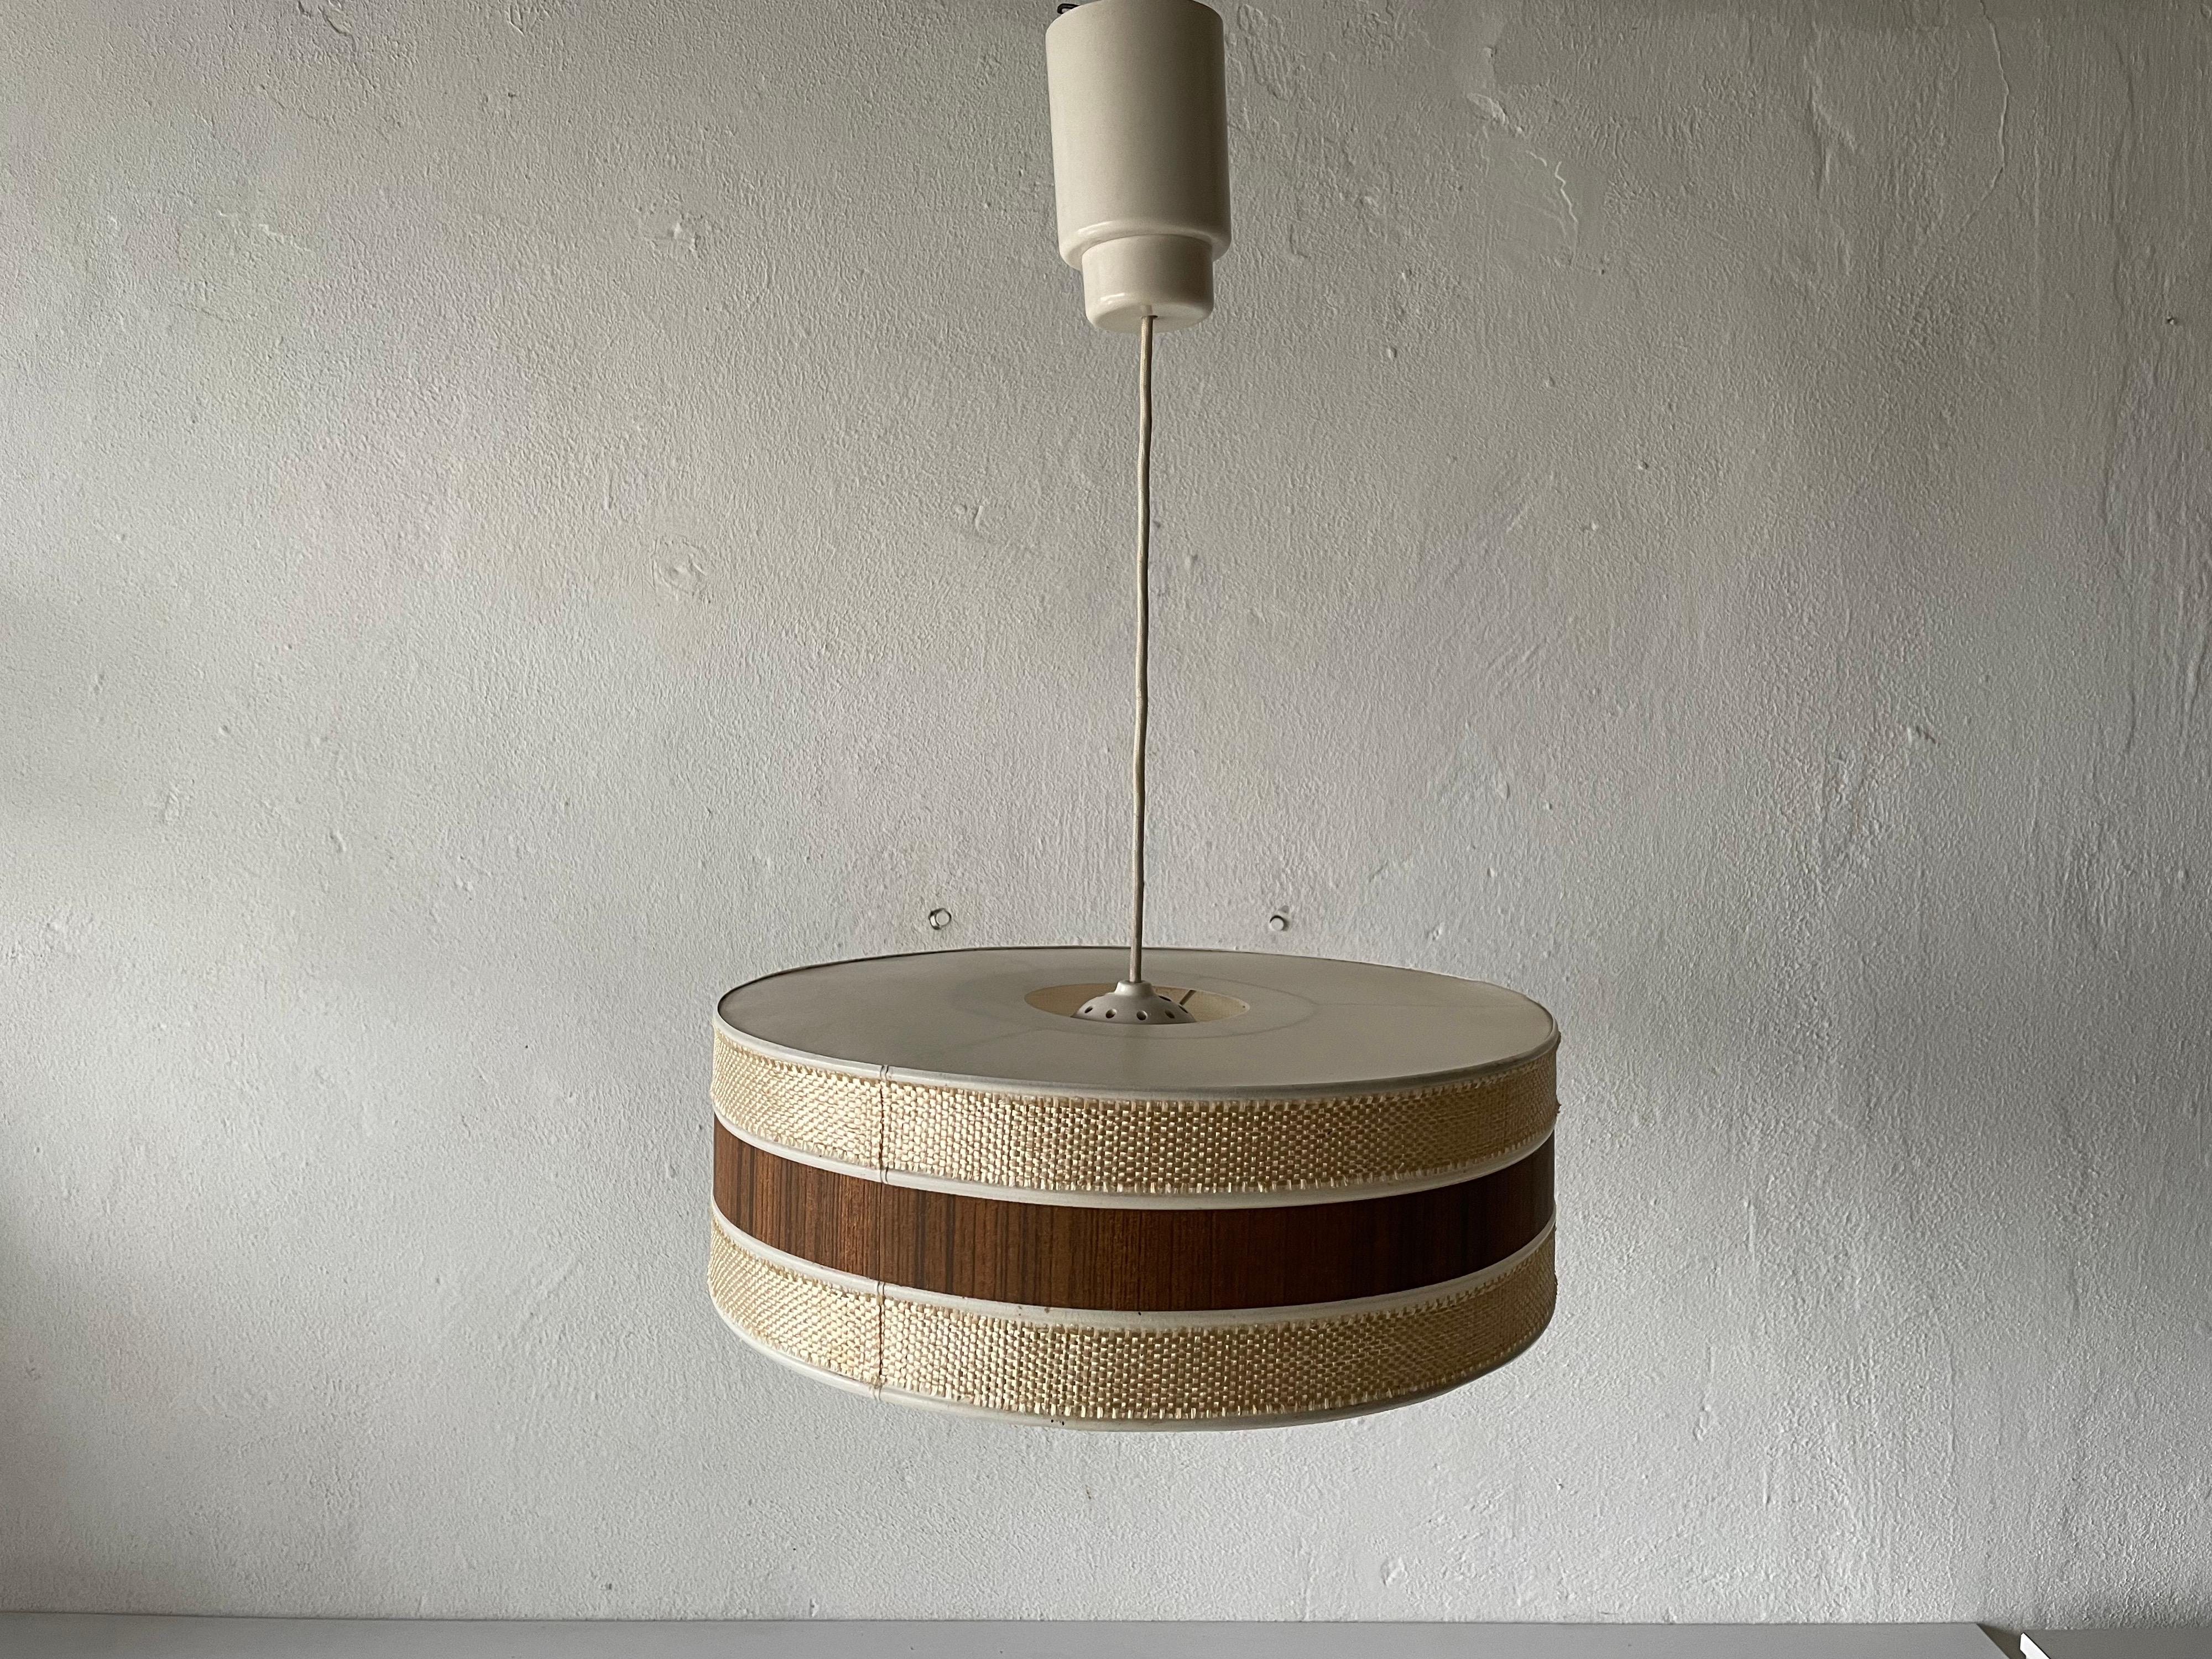 Mid-20th Century Rare Wooden and Fabric Mid-Century Pendant Lamp by Temde, 1960s Germany